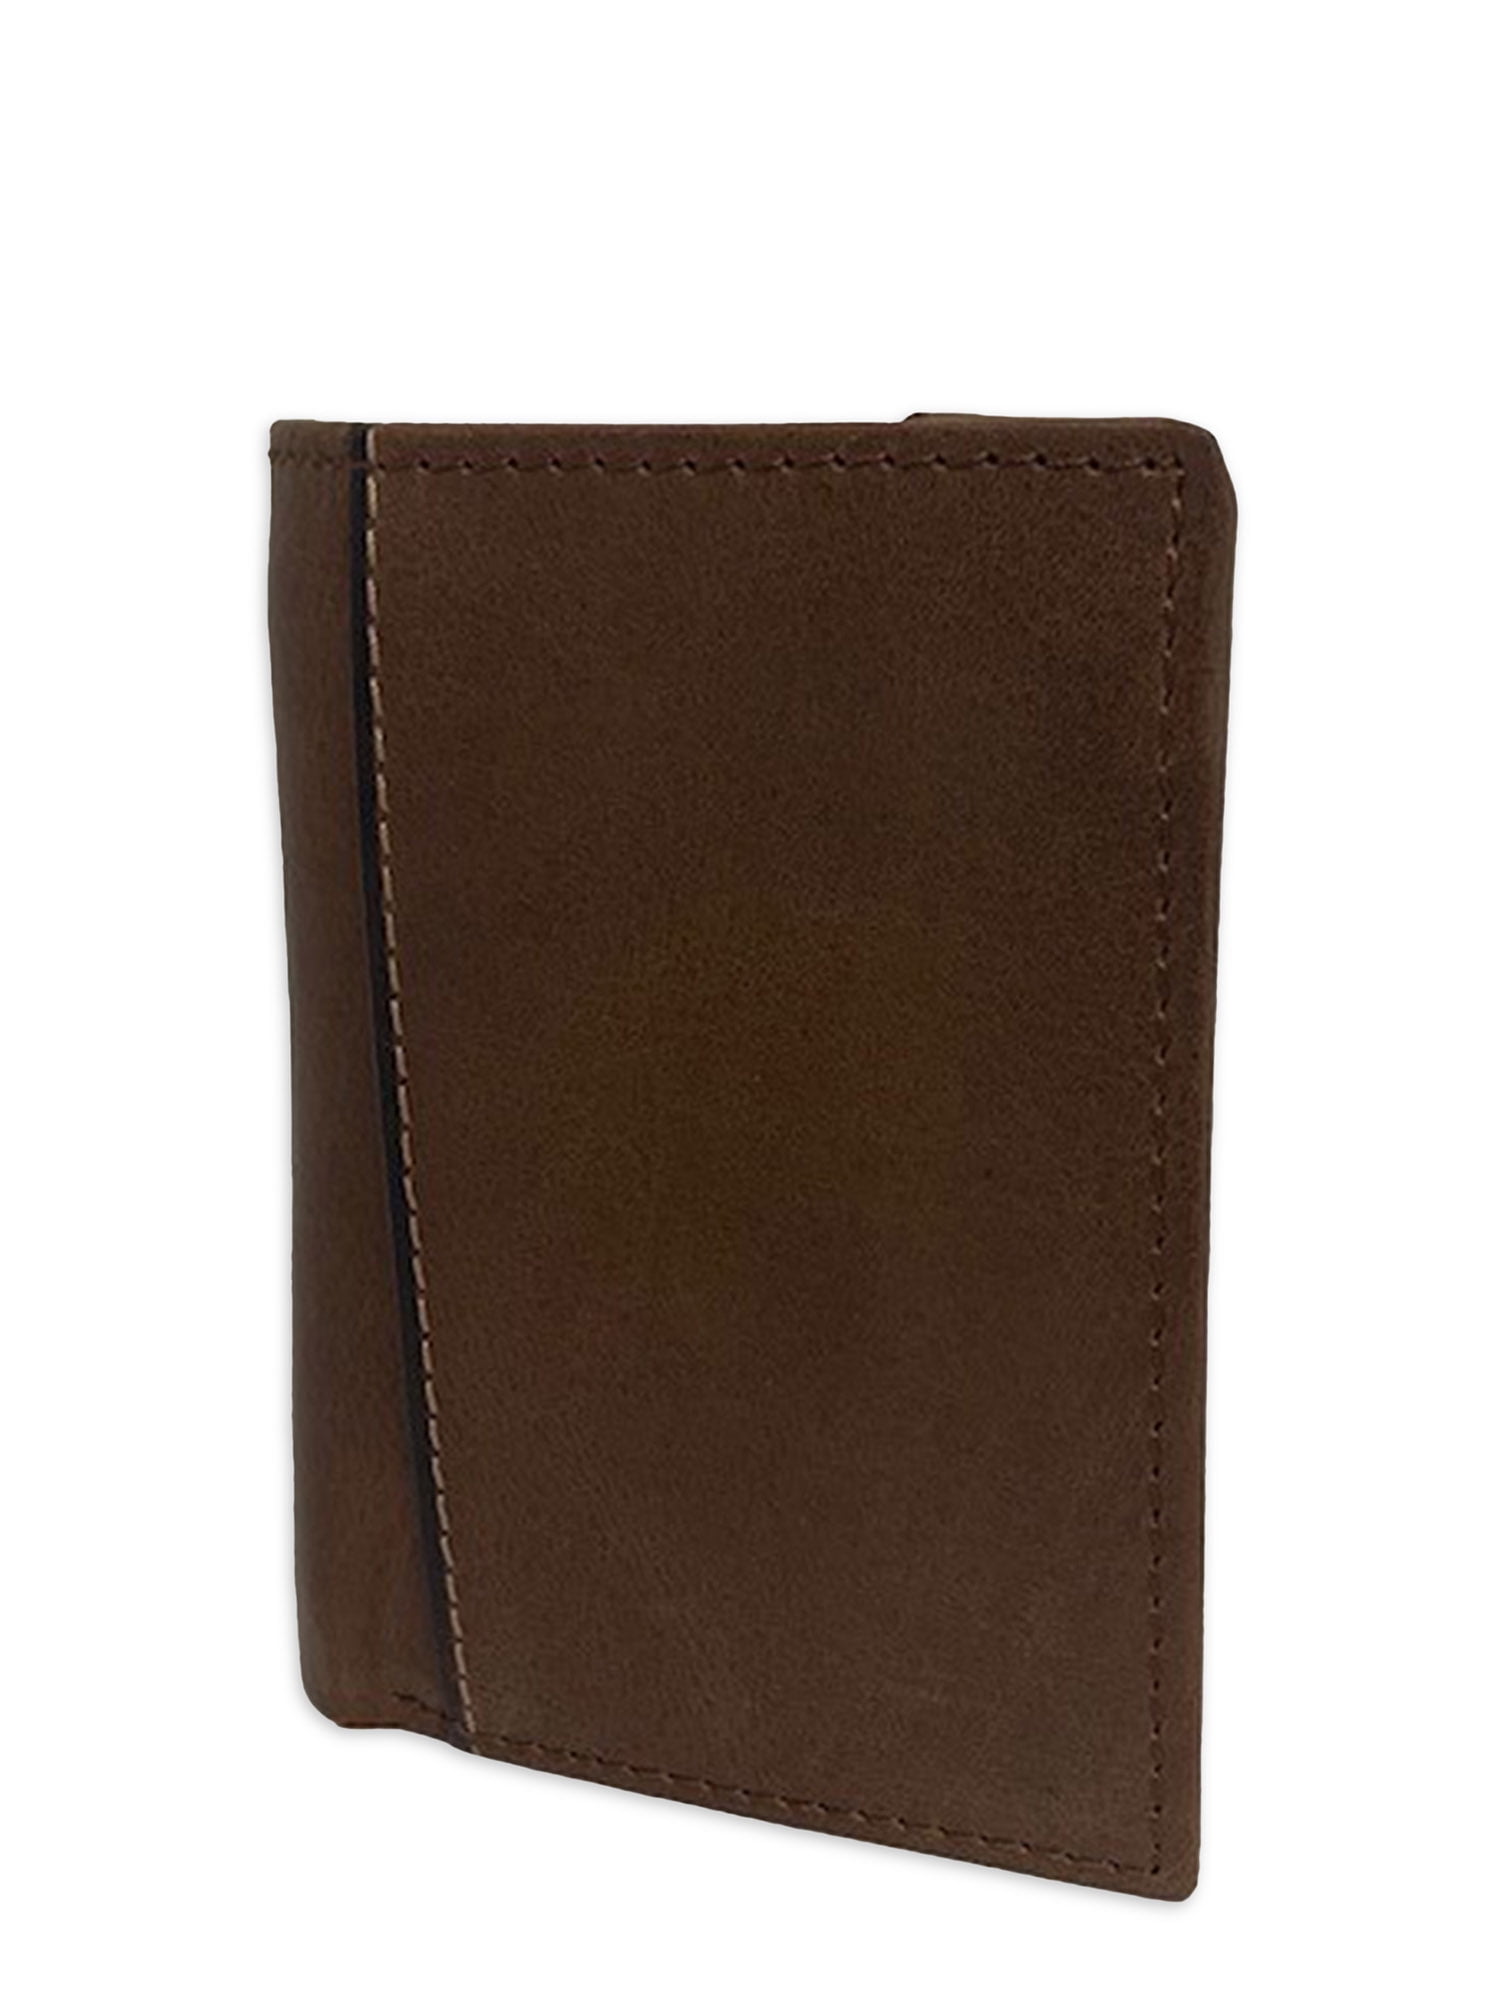 GEORGE Stitch Trifold Brown Leather Wallet 